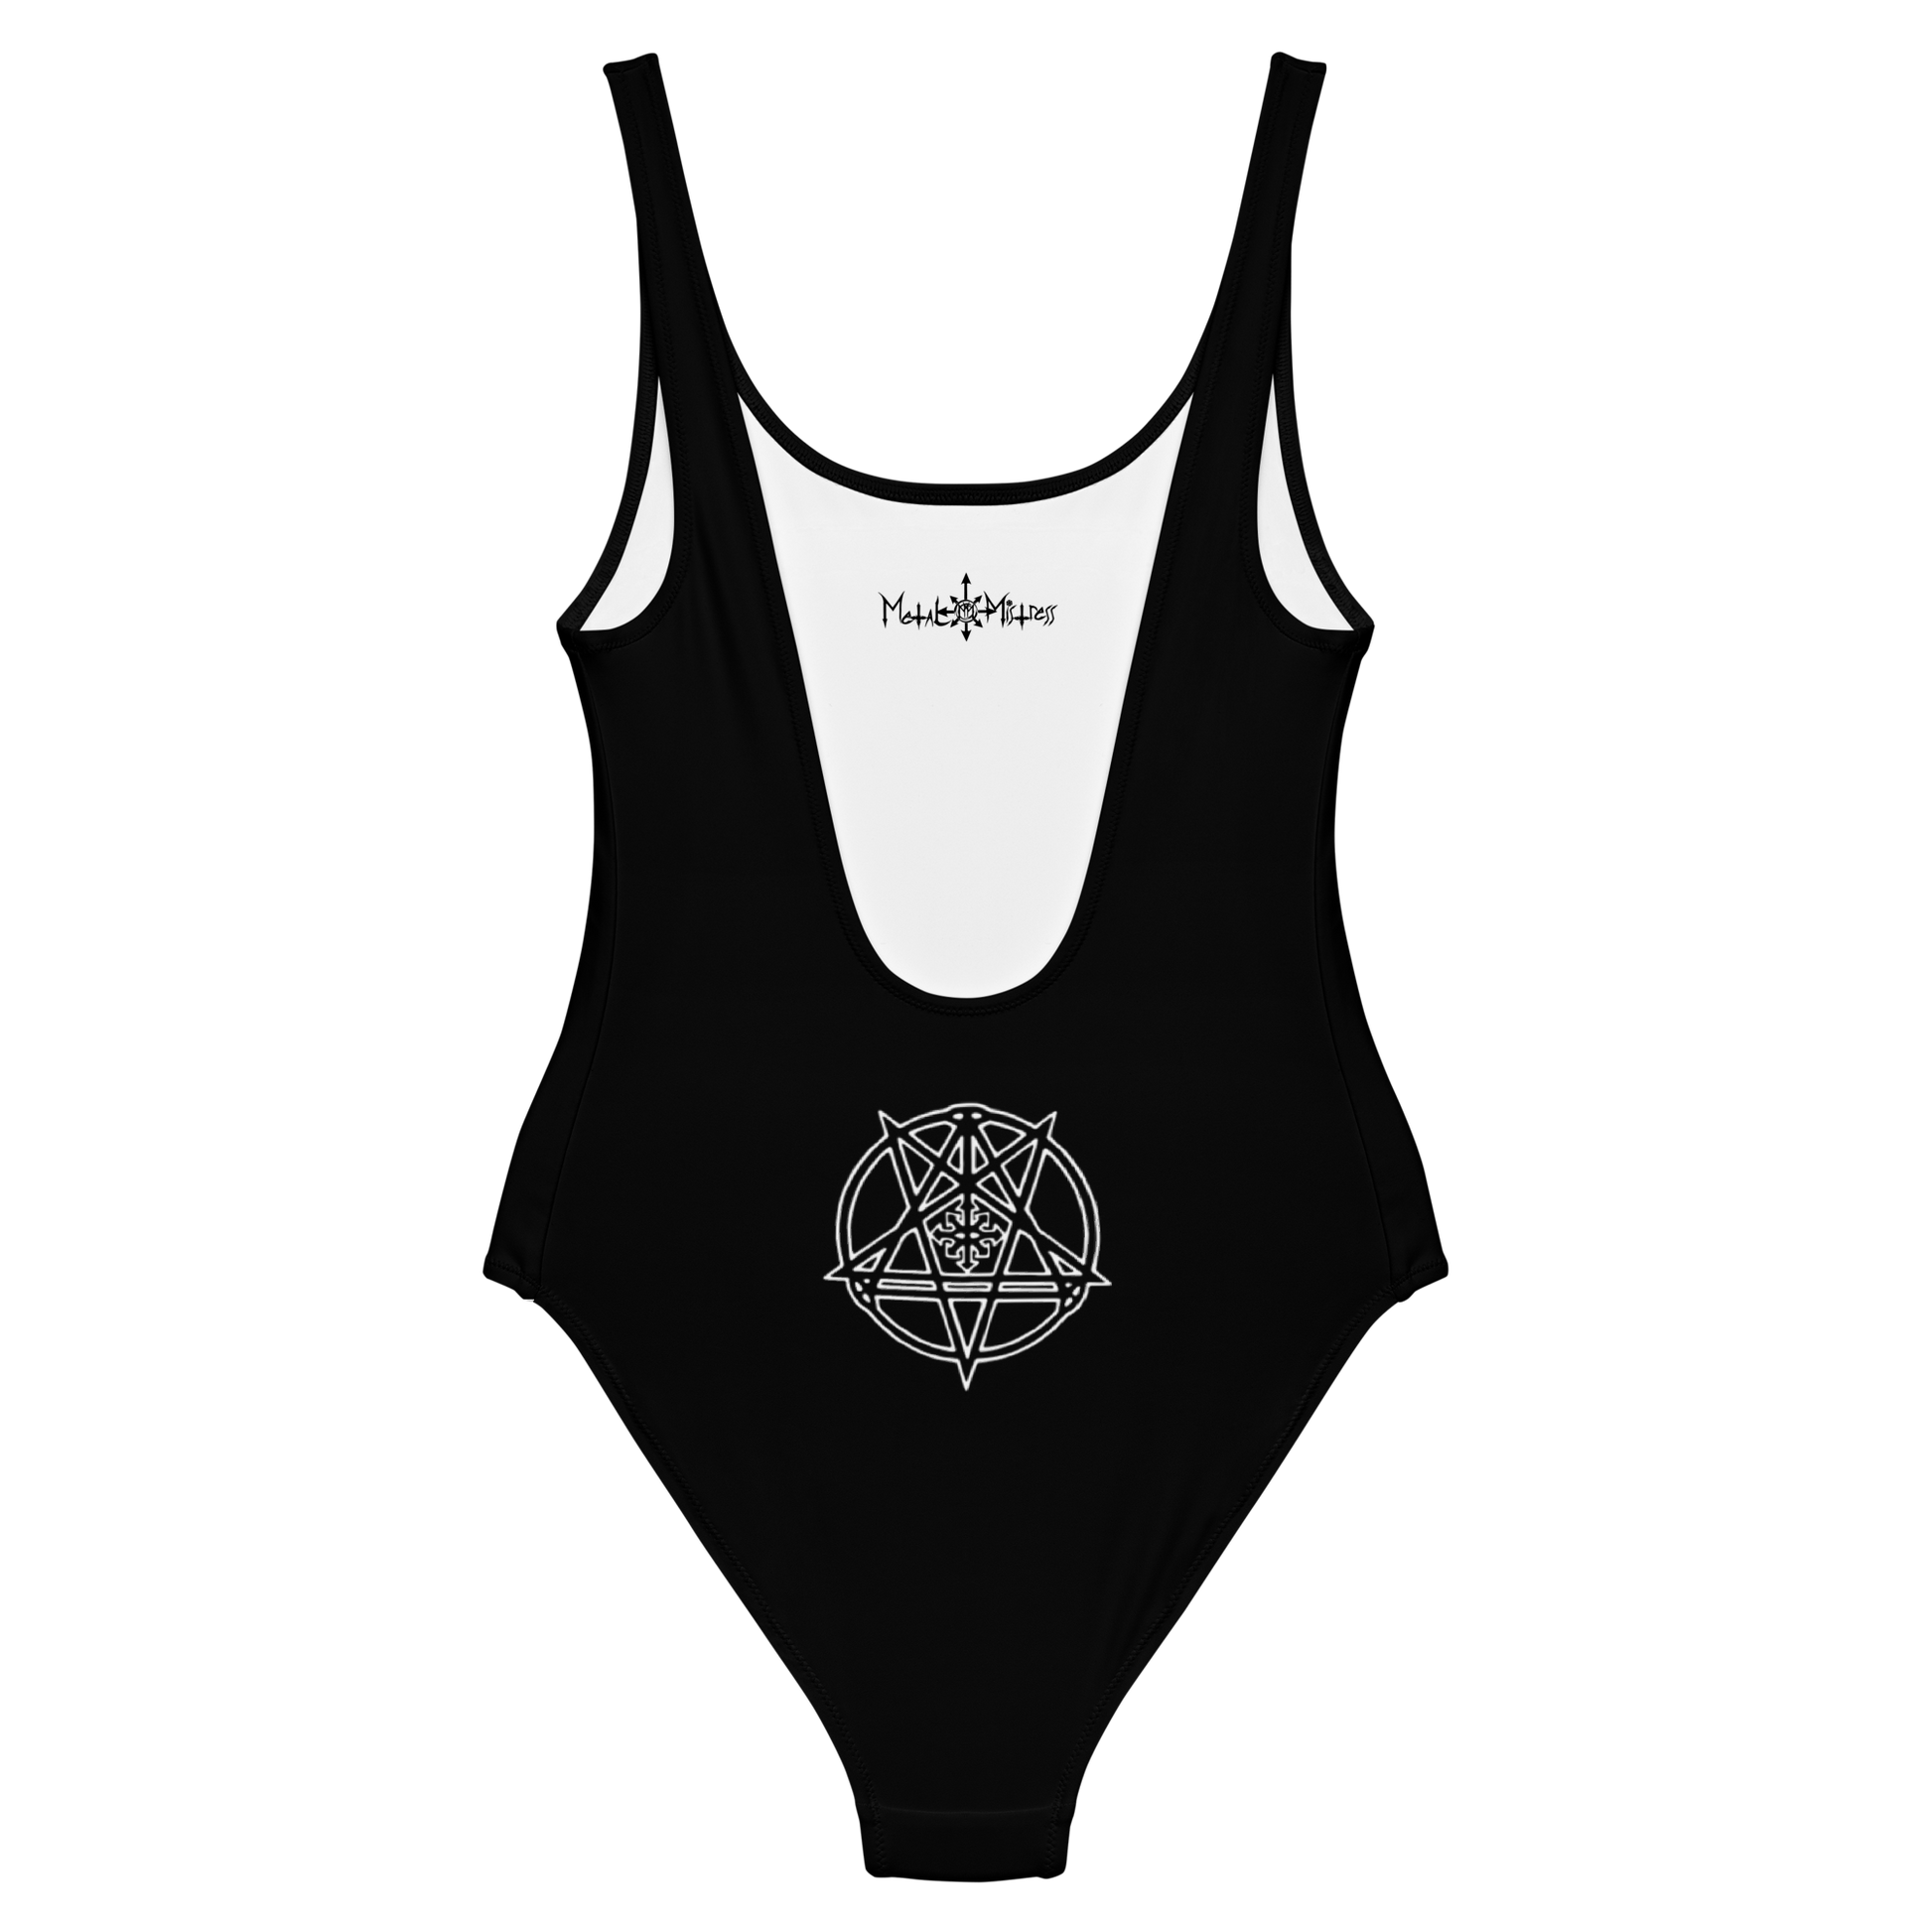 Blasphemy Victory (Son of the Damned) official one piece swimsuit by Metal Mistress